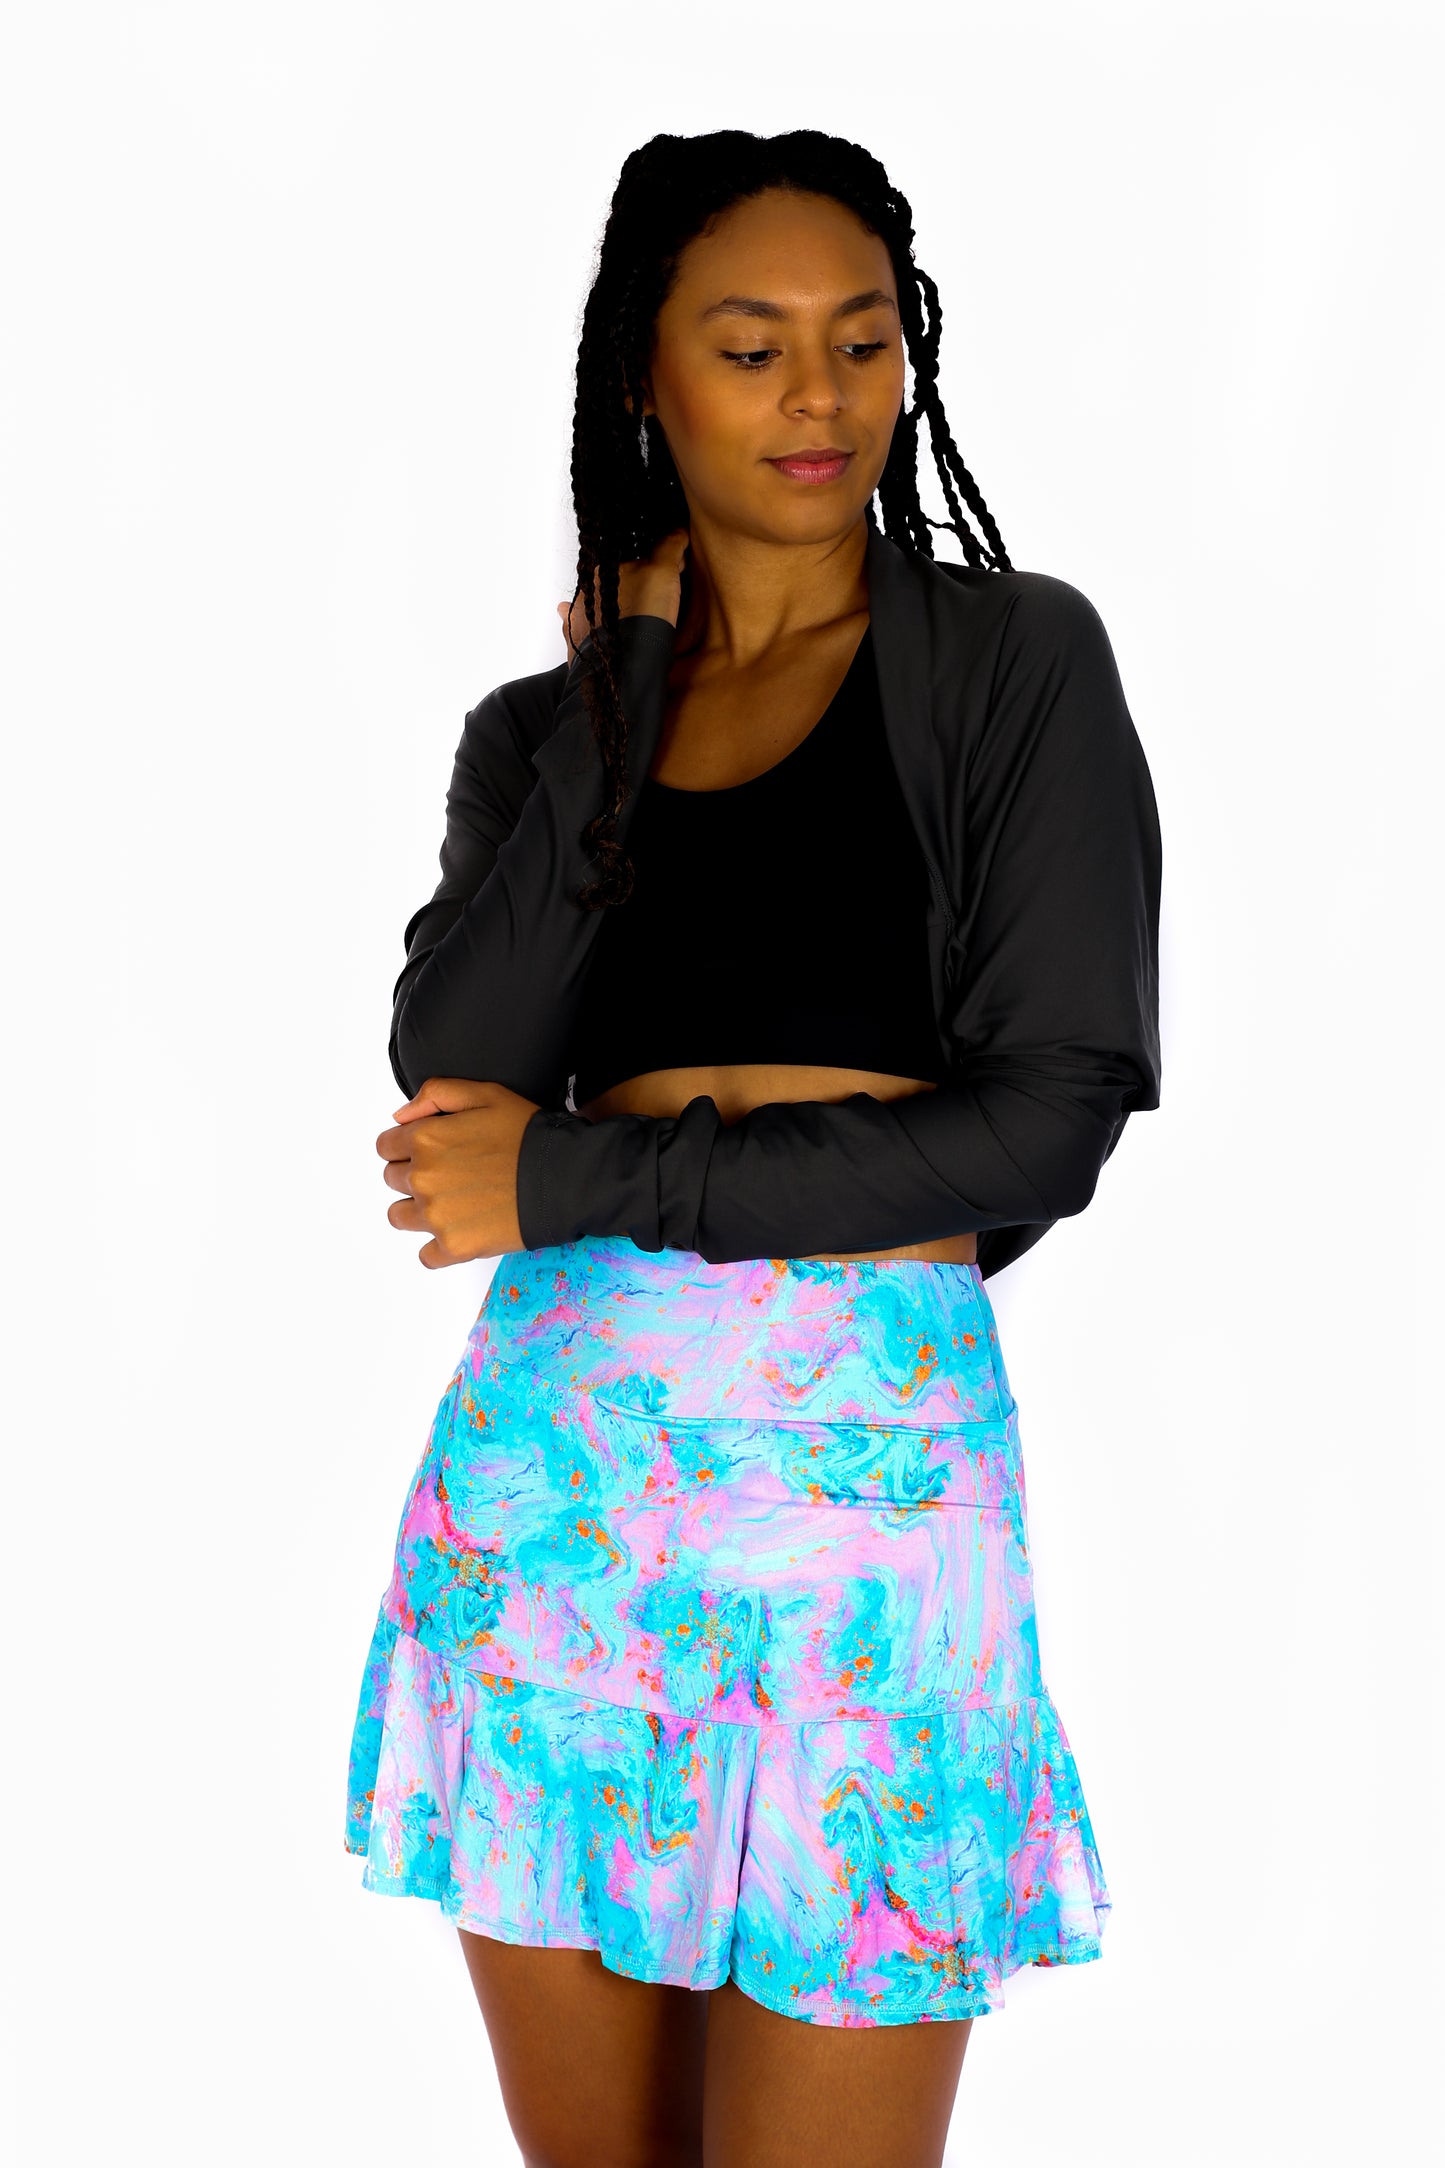 Cloudy flow Short Skirt with Pocket